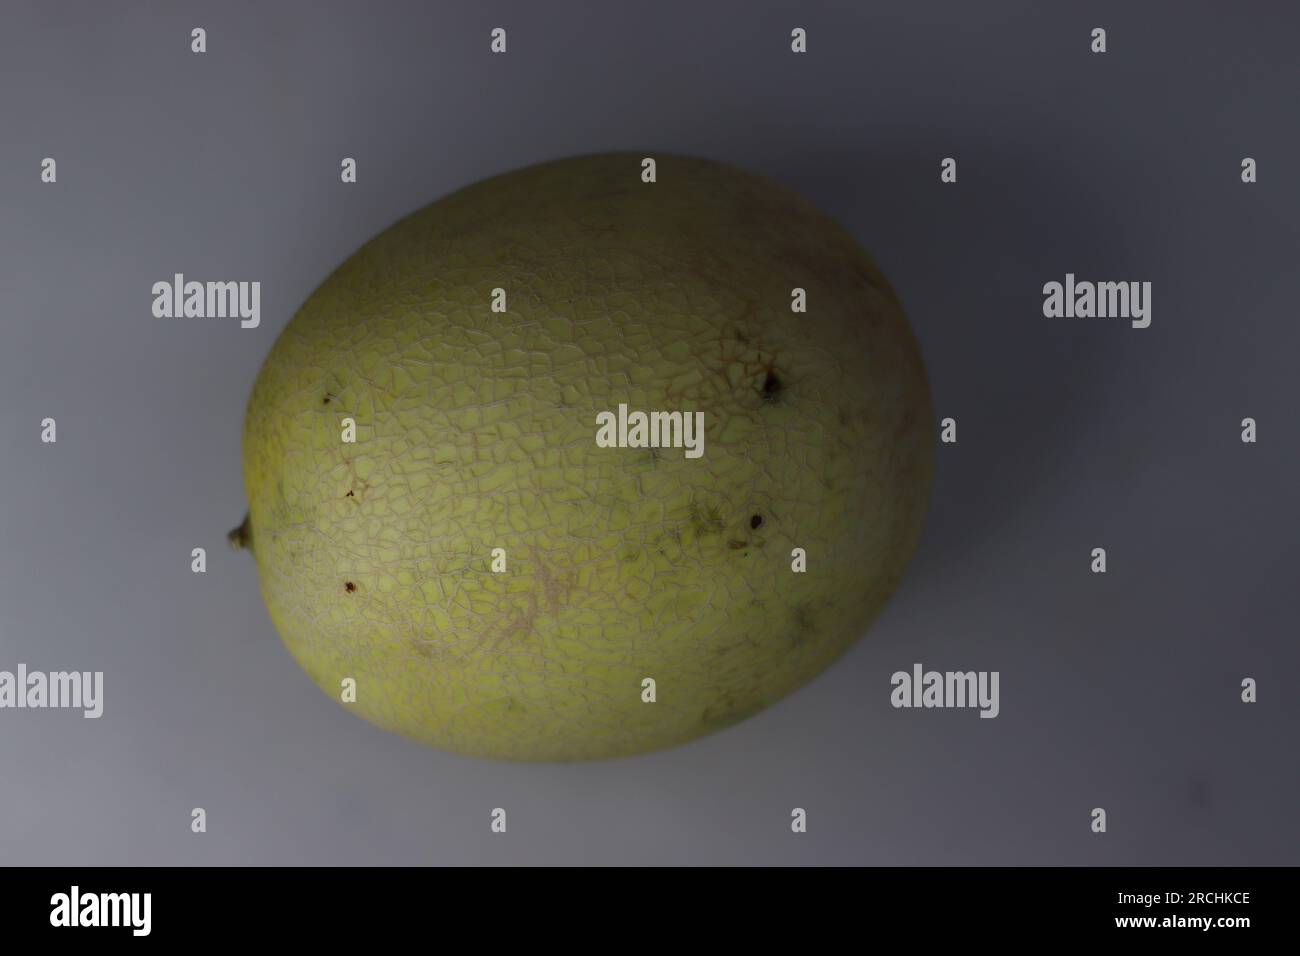 Honeydew Melon. It is one of the two main cultivar types in Cucumis melo Inodorus Group. It is characterized by the smooth rind and lack of musky odou Stock Photo